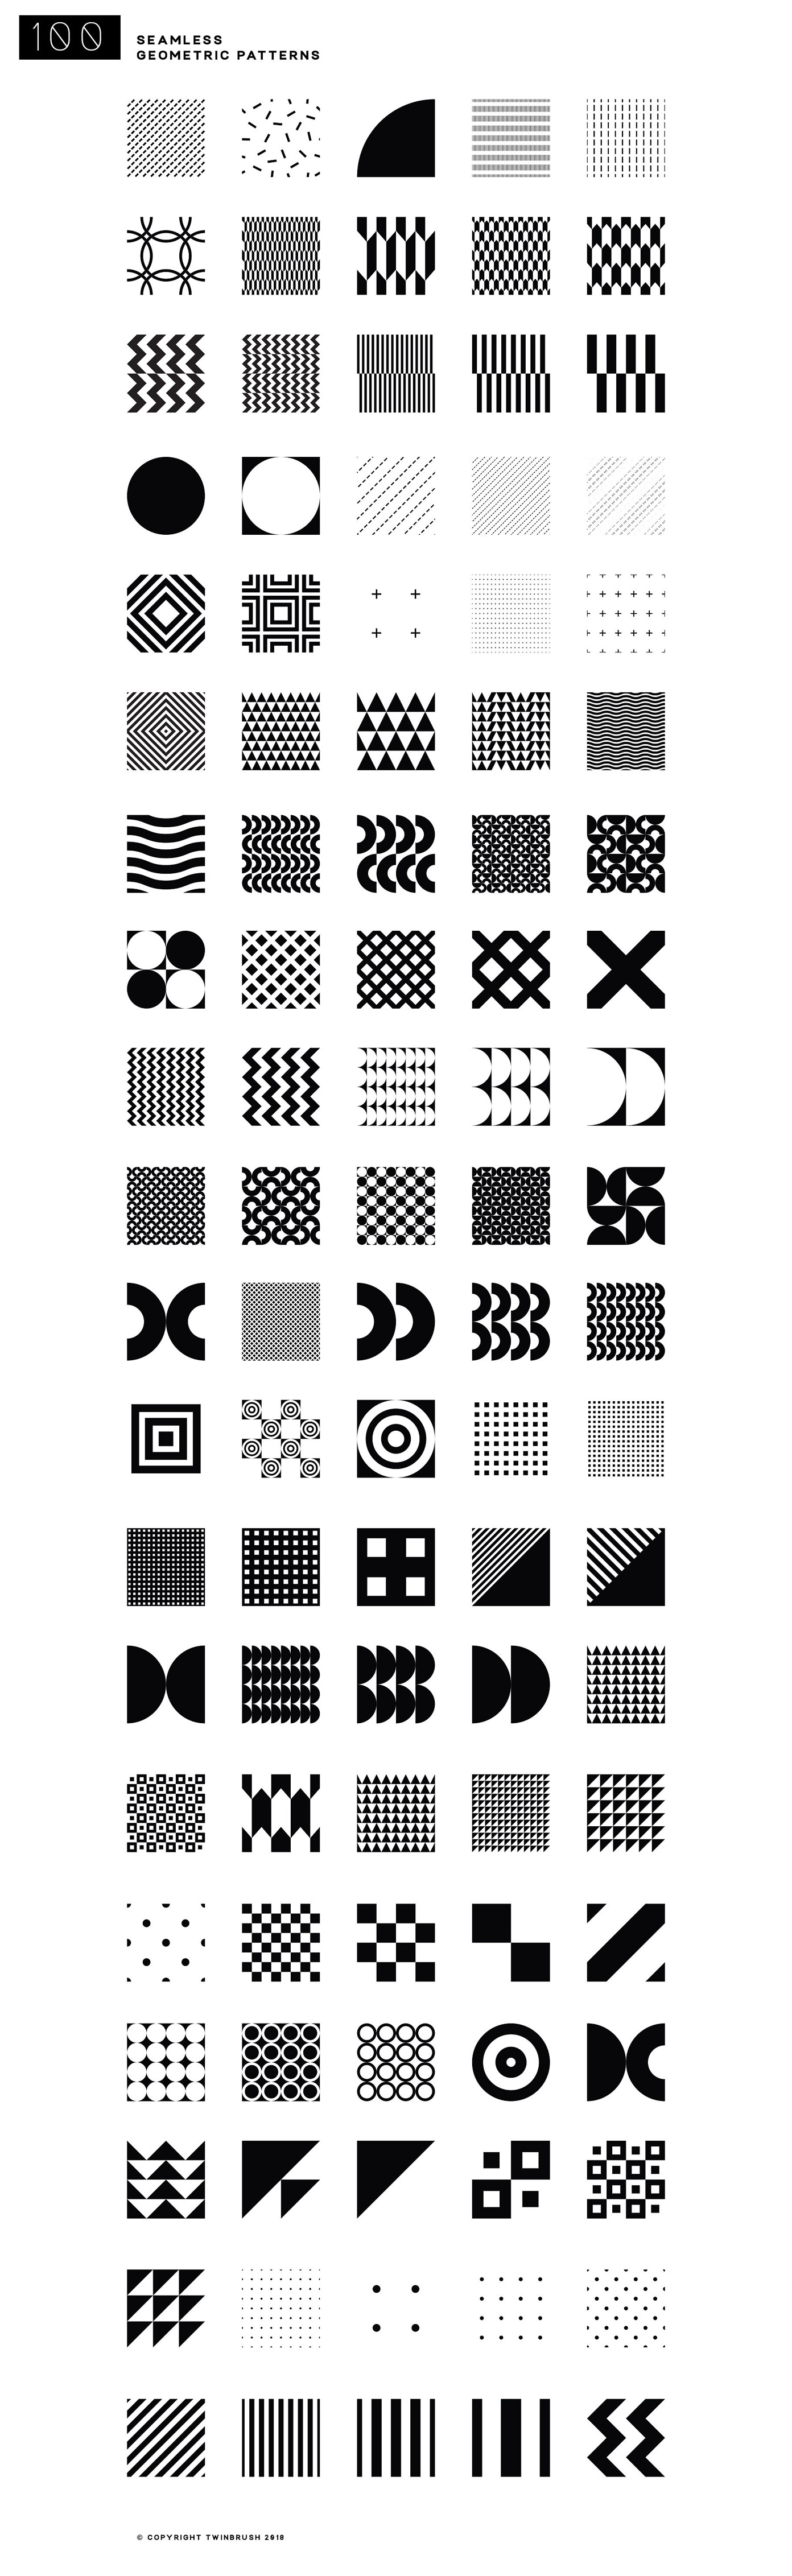 all patterns